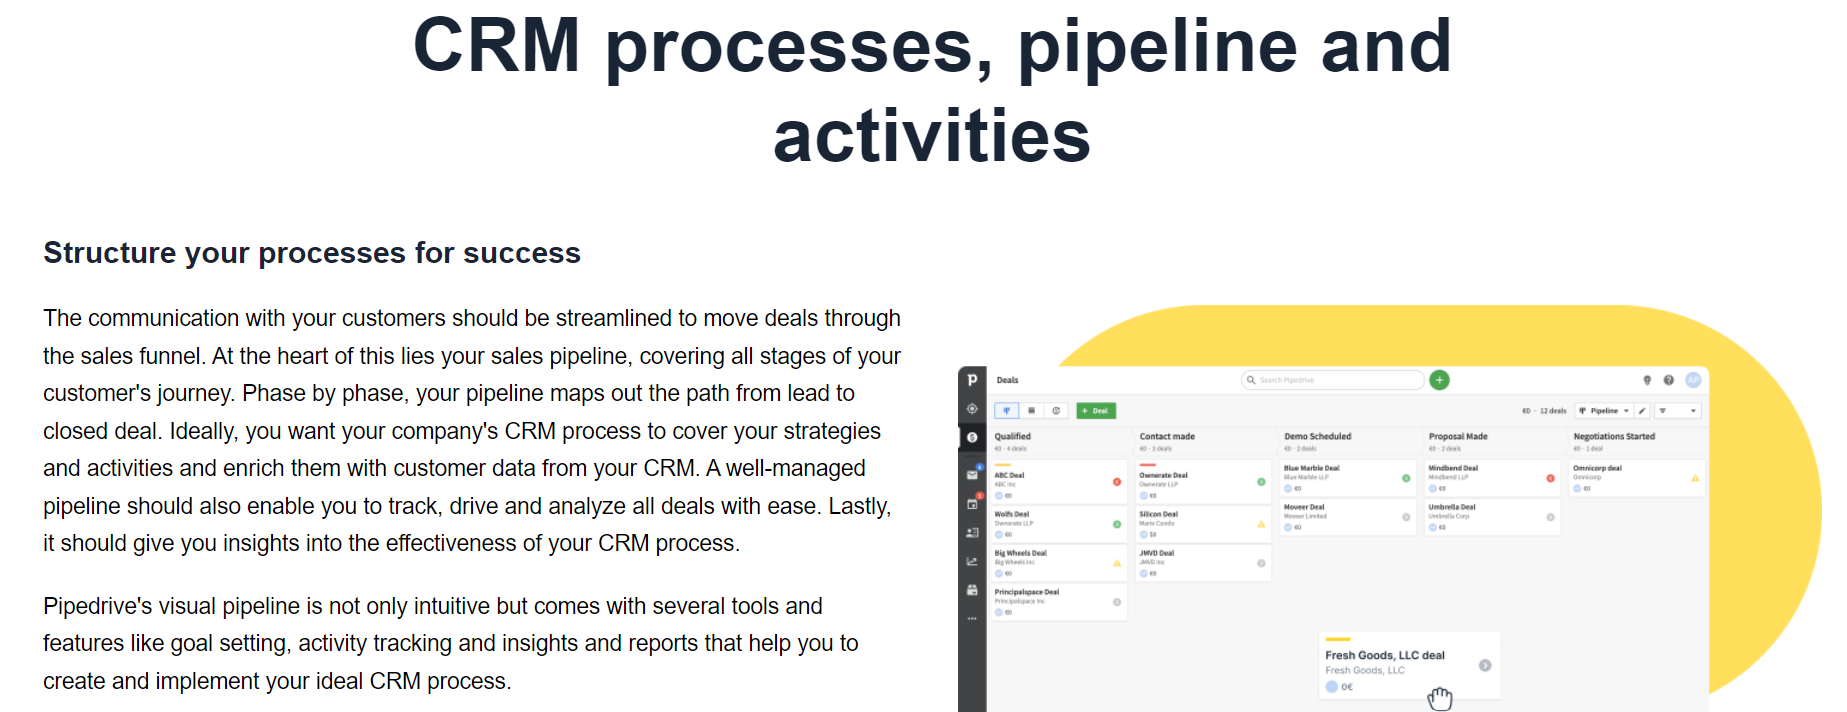 Pipedrive Processes, Pipeline and Activities